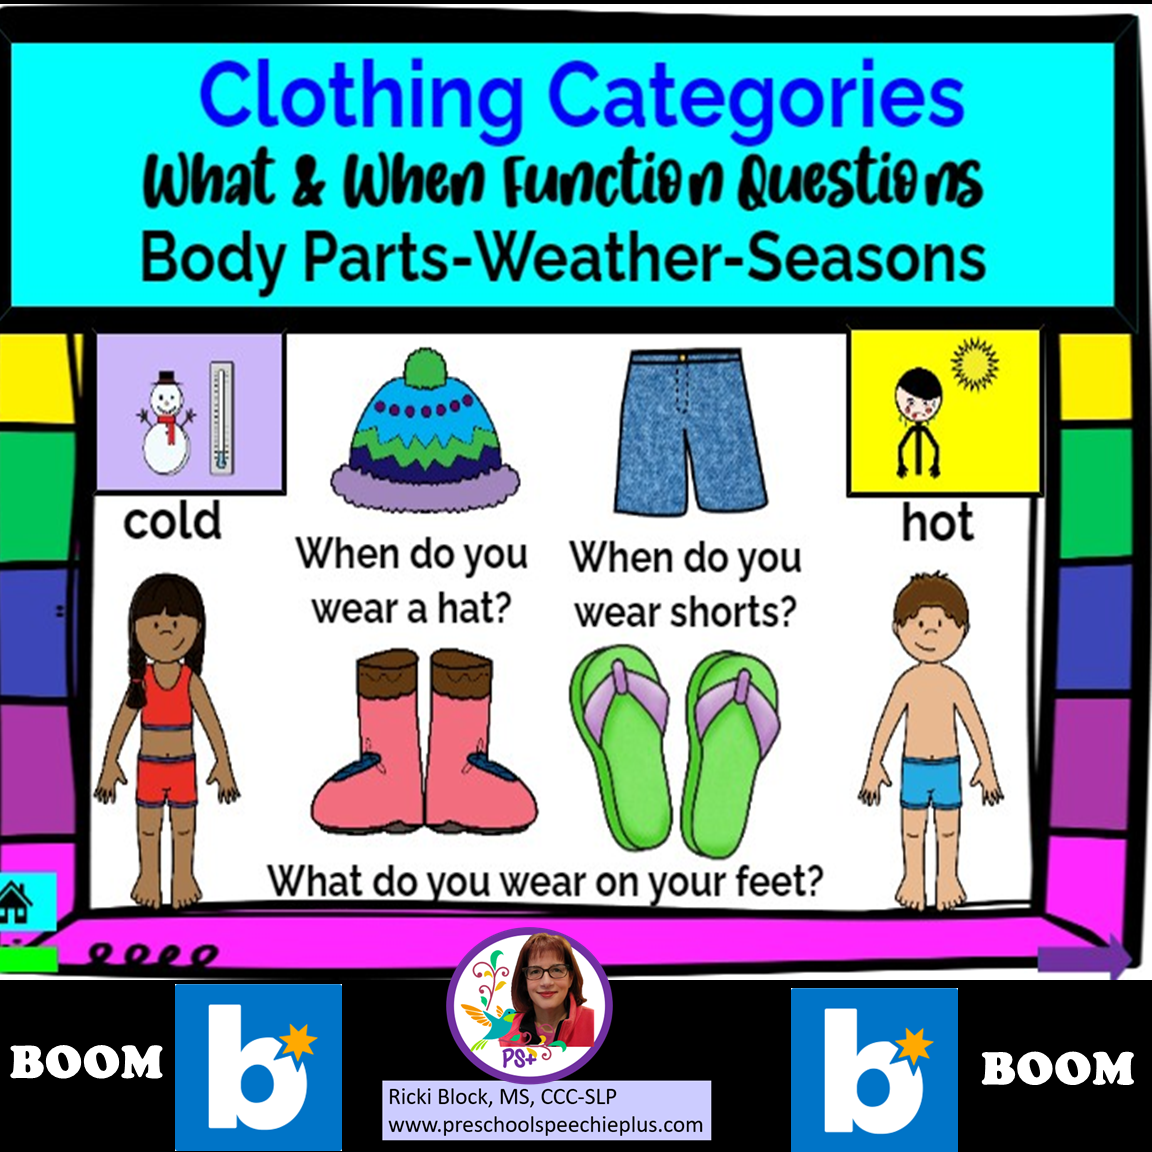 Clothing Categories cOVER NEW.png (Copy)